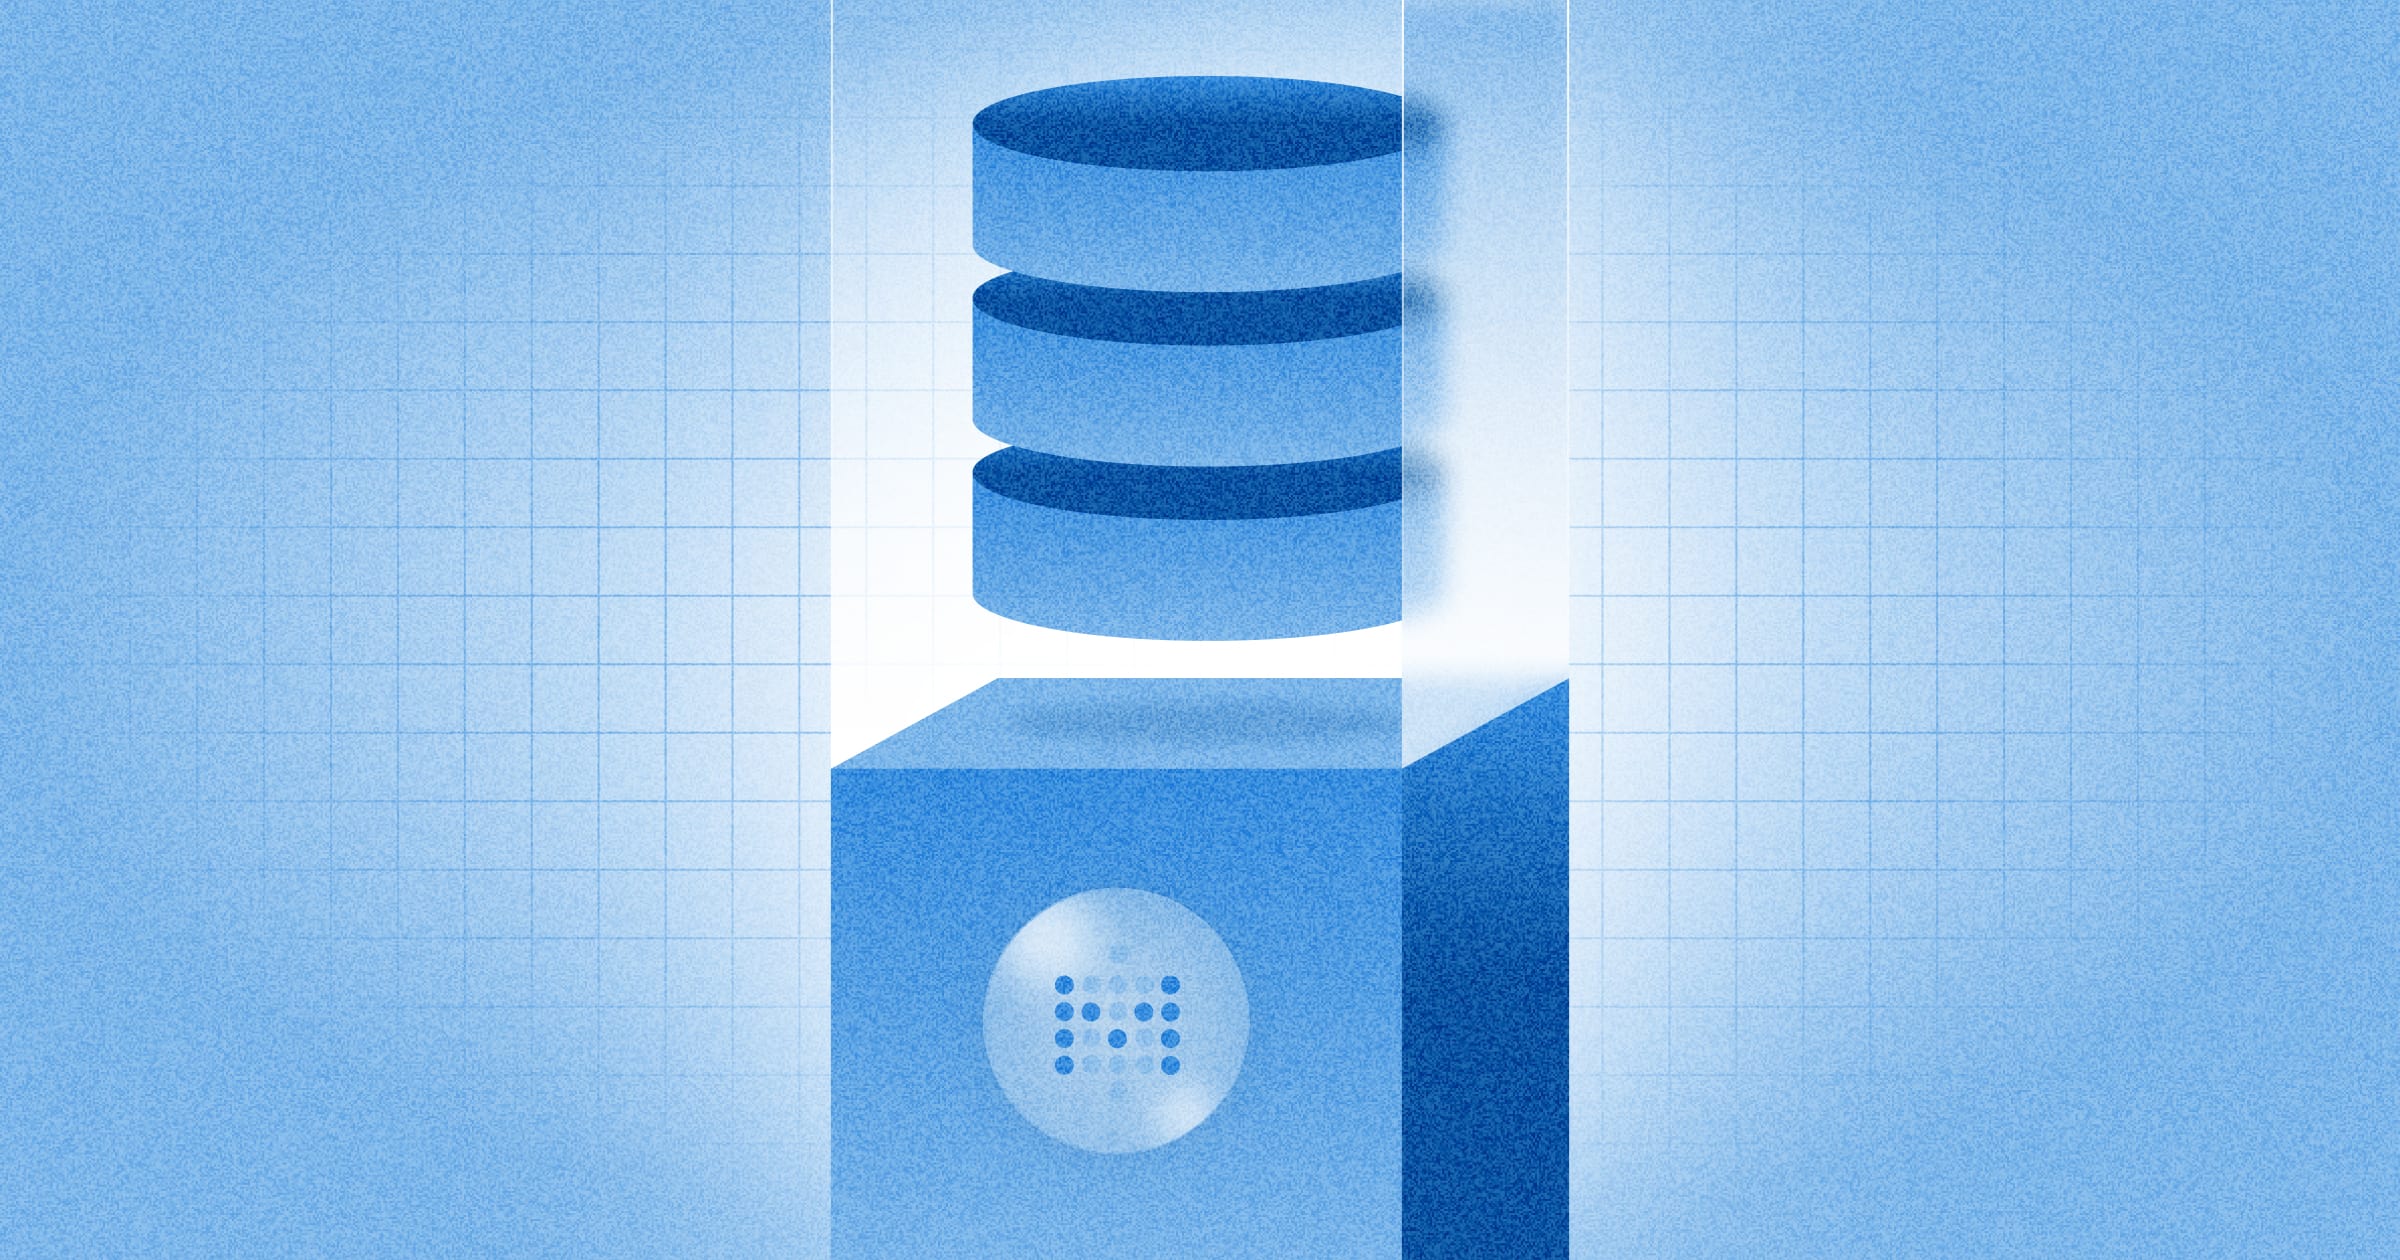 You don't need a data warehouse Image